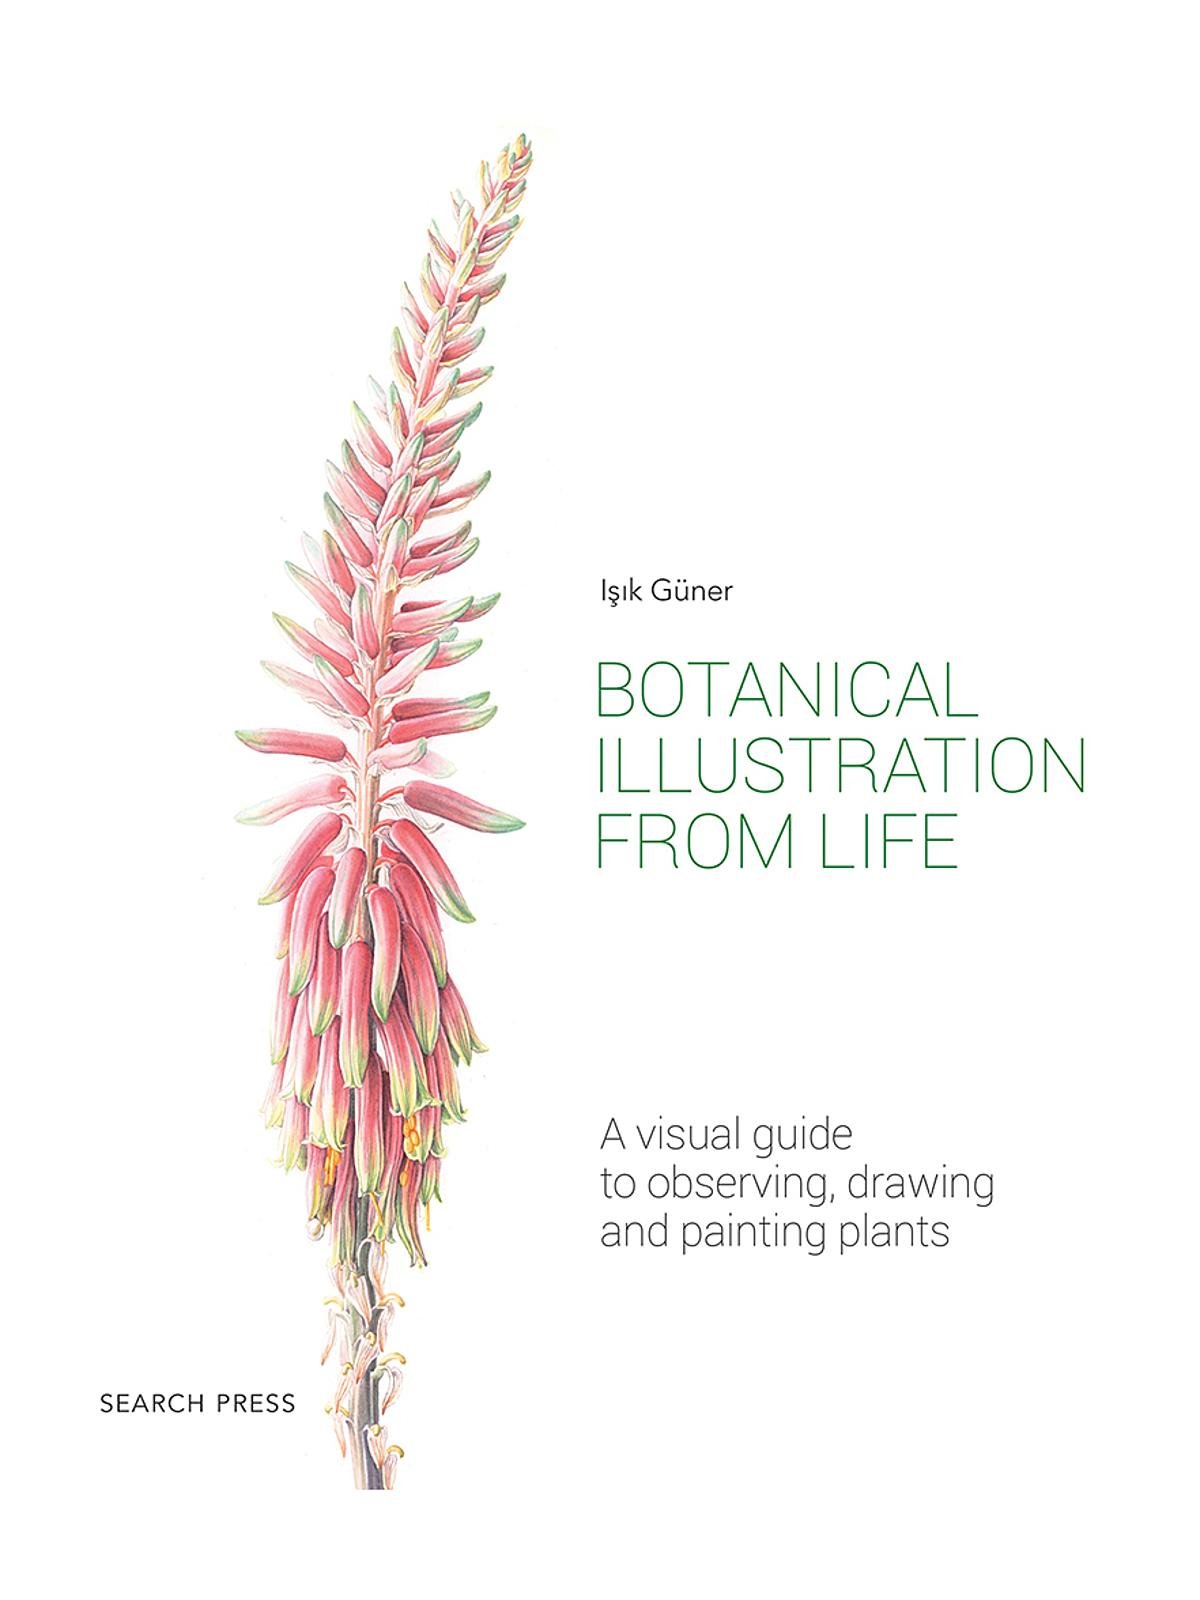 Search Press - Botanical Illustration from Life